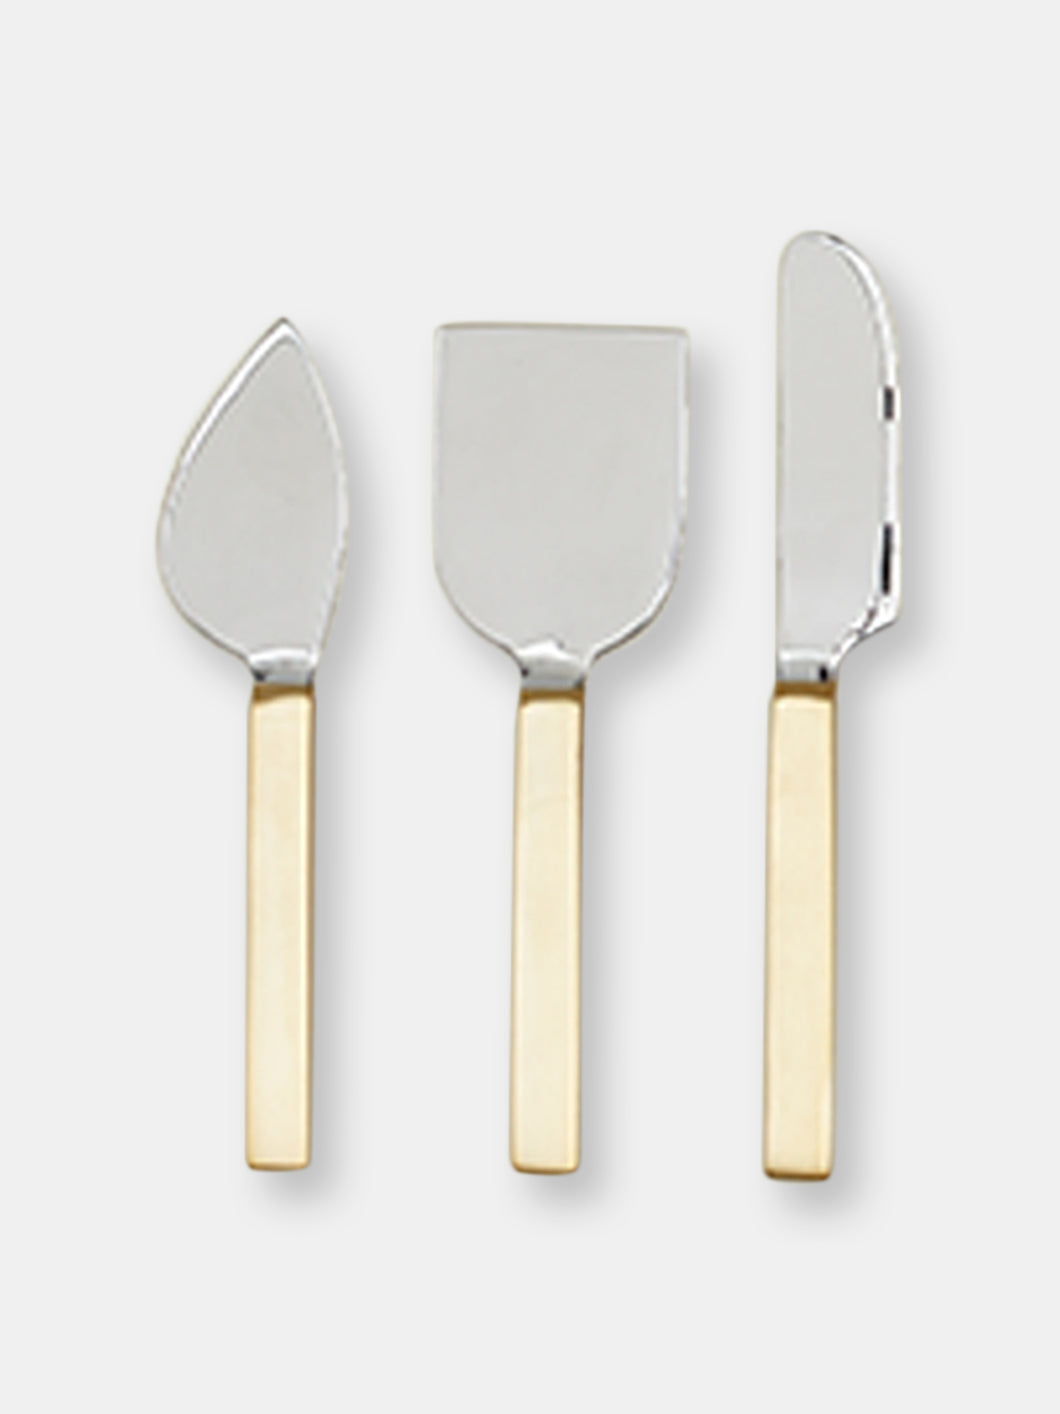 Simple Cheese Knives - Set Of 3